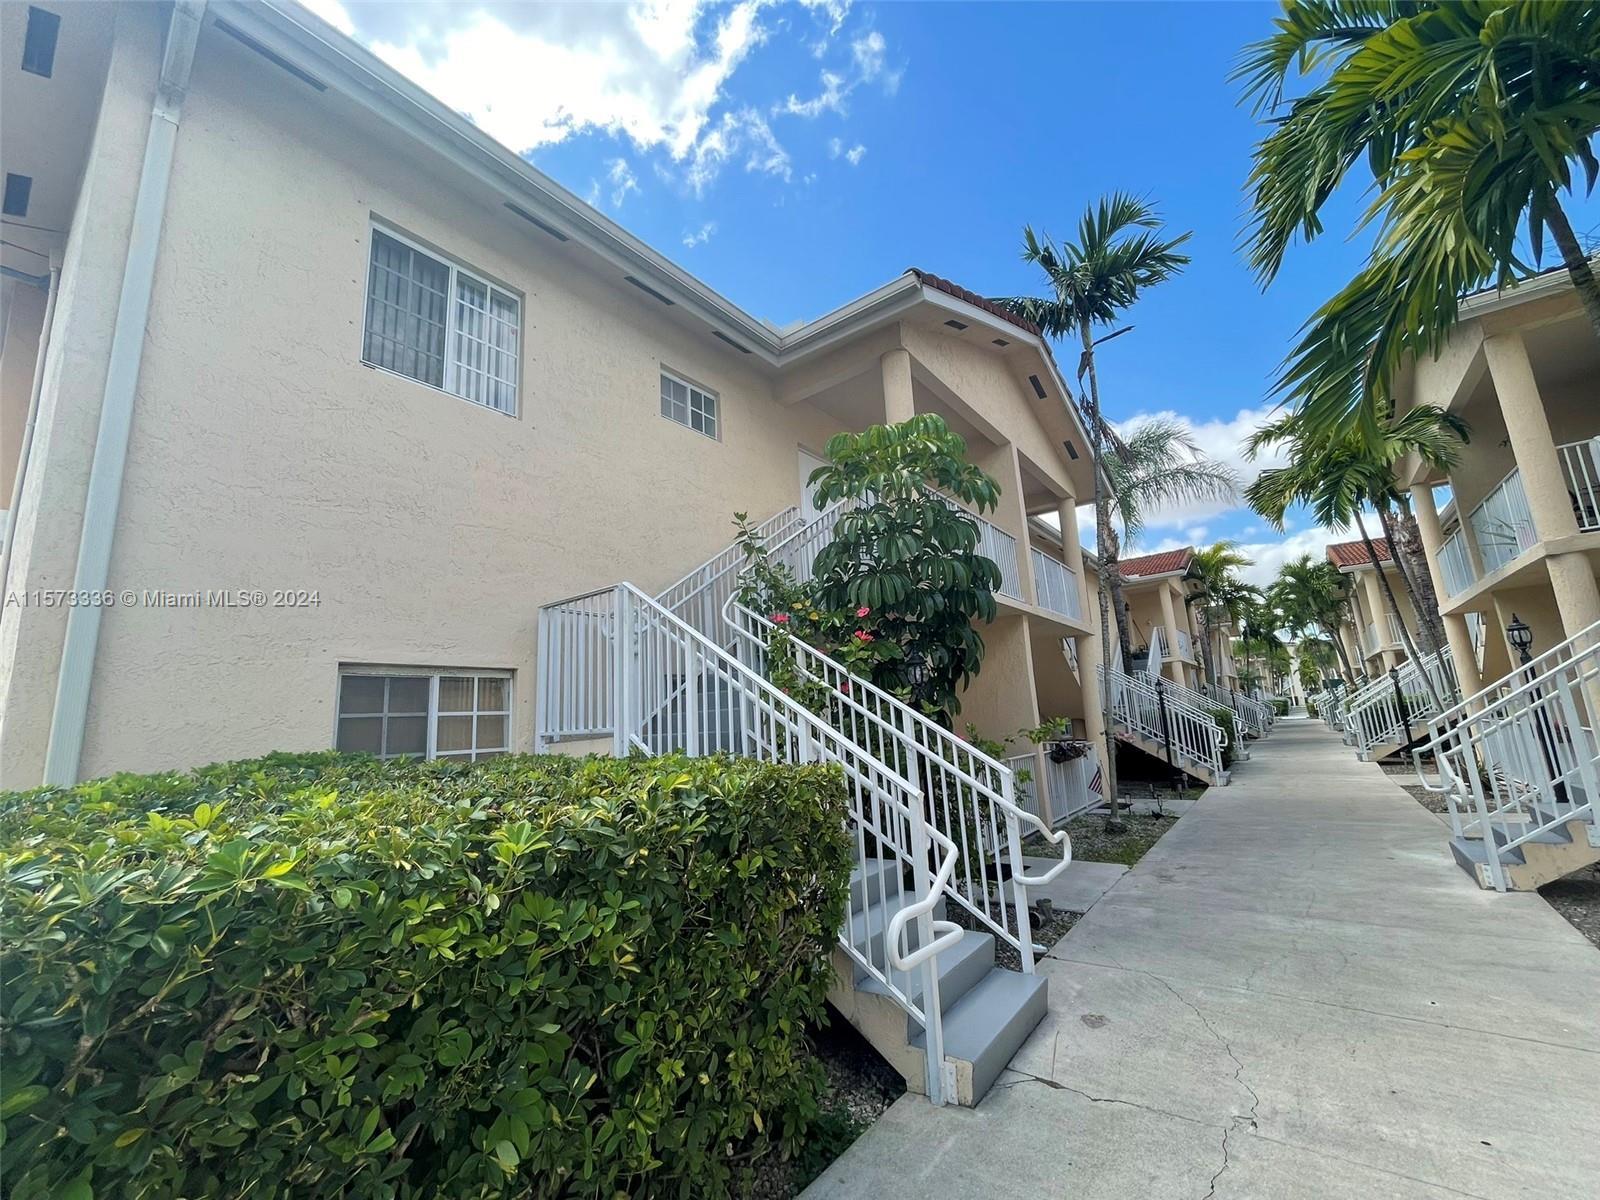 Photo of 6972 NW 179th St #201-4 in Hialeah, FL